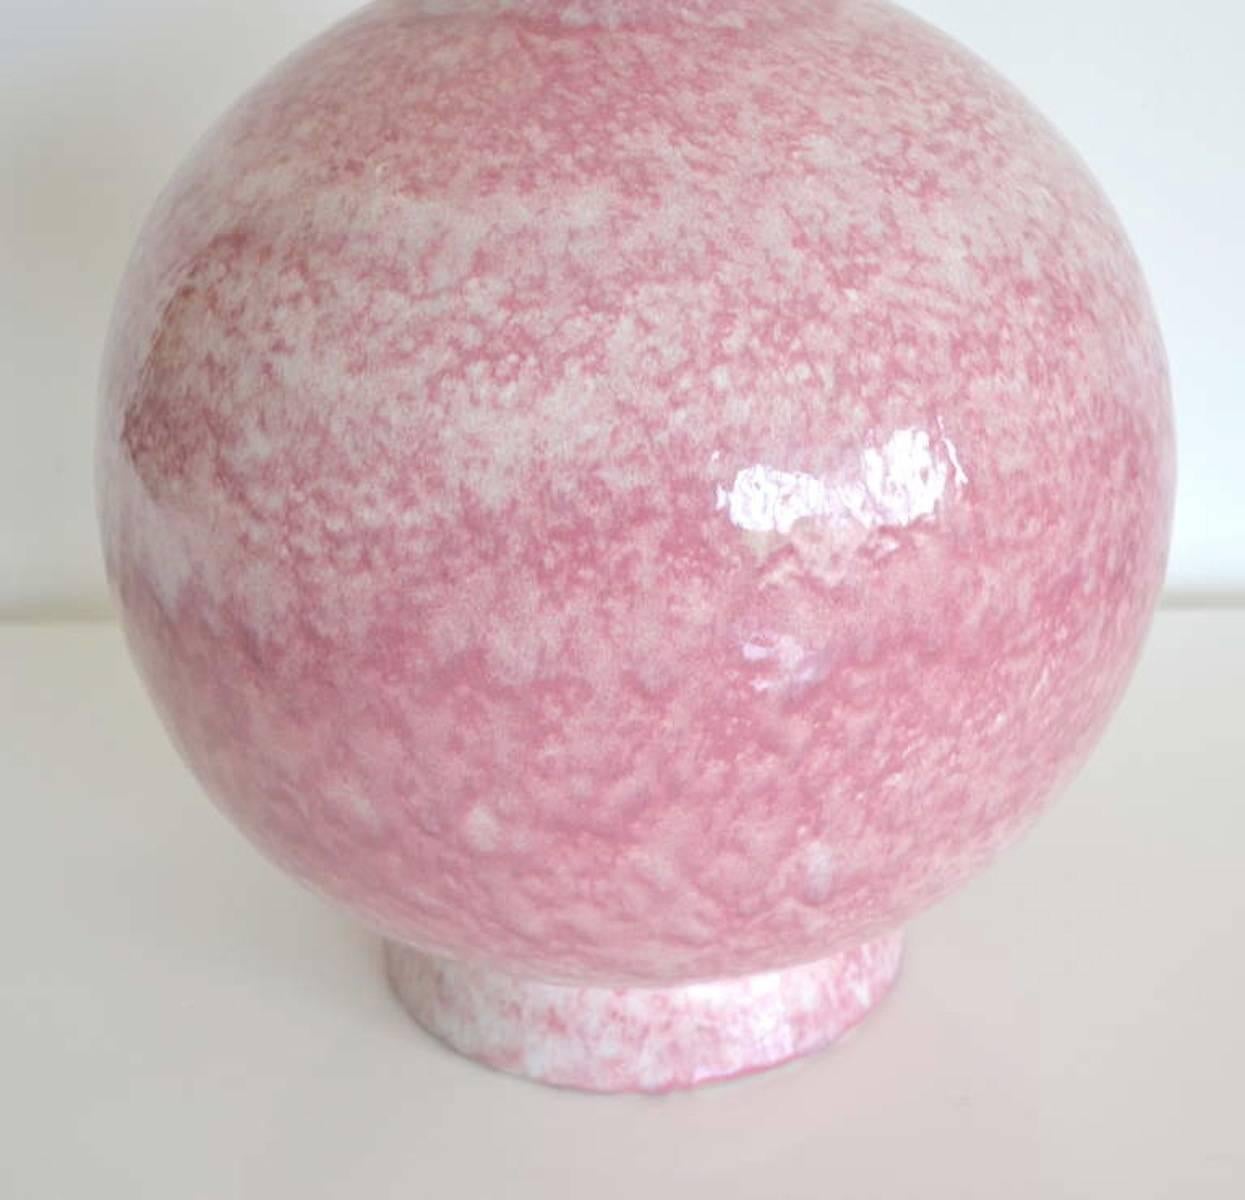 Midcentury Long Neck Crackle Glazed Ceramic Vase In Good Condition For Sale In West Palm Beach, FL